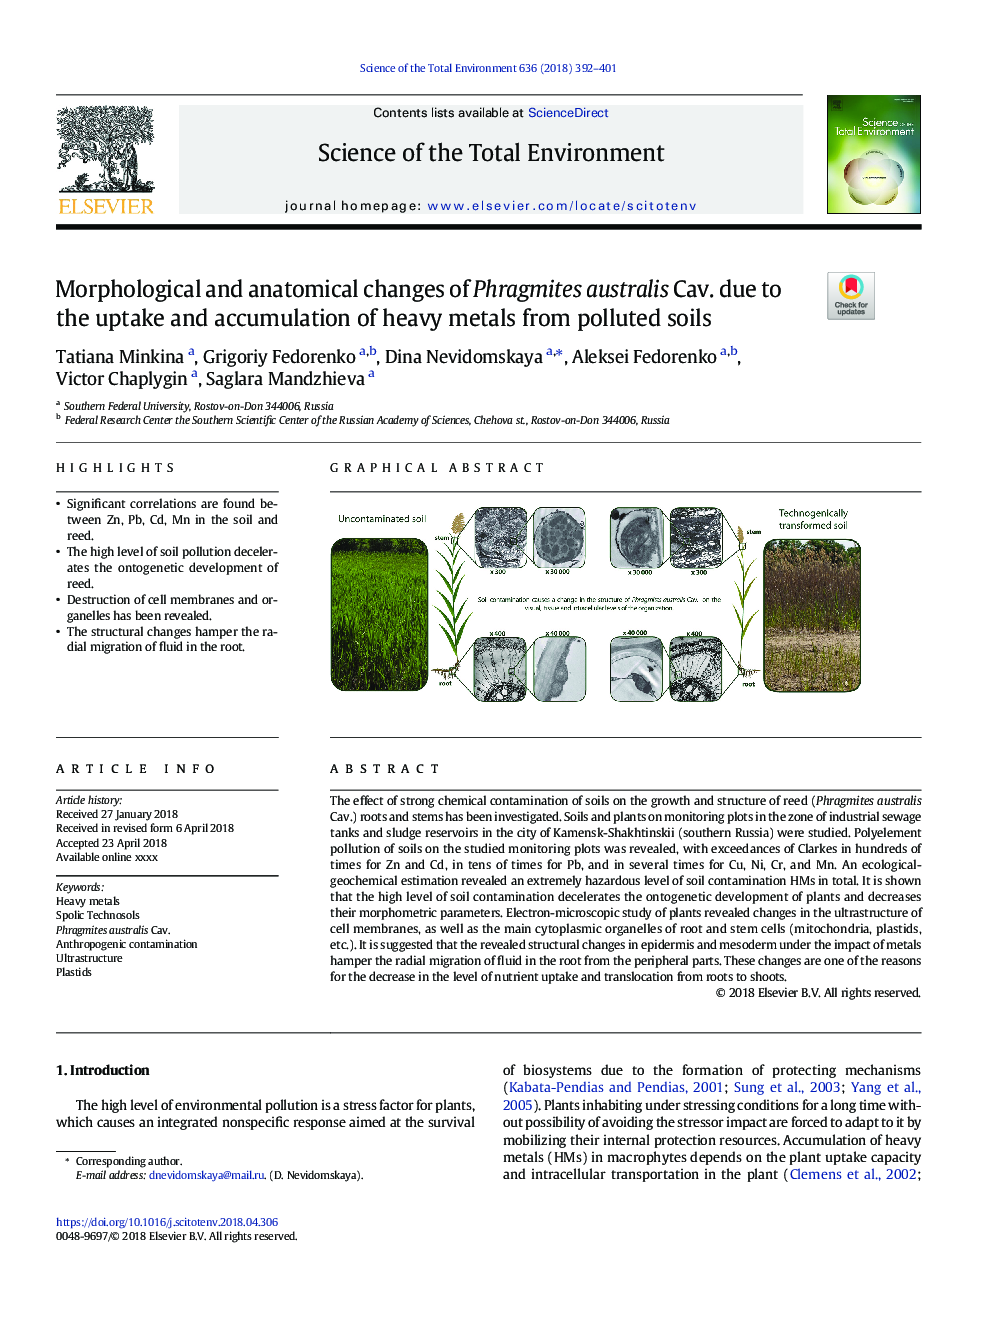 Morphological and anatomical changes of Phragmites australis Cav. due to the uptake and accumulation of heavy metals from polluted soils